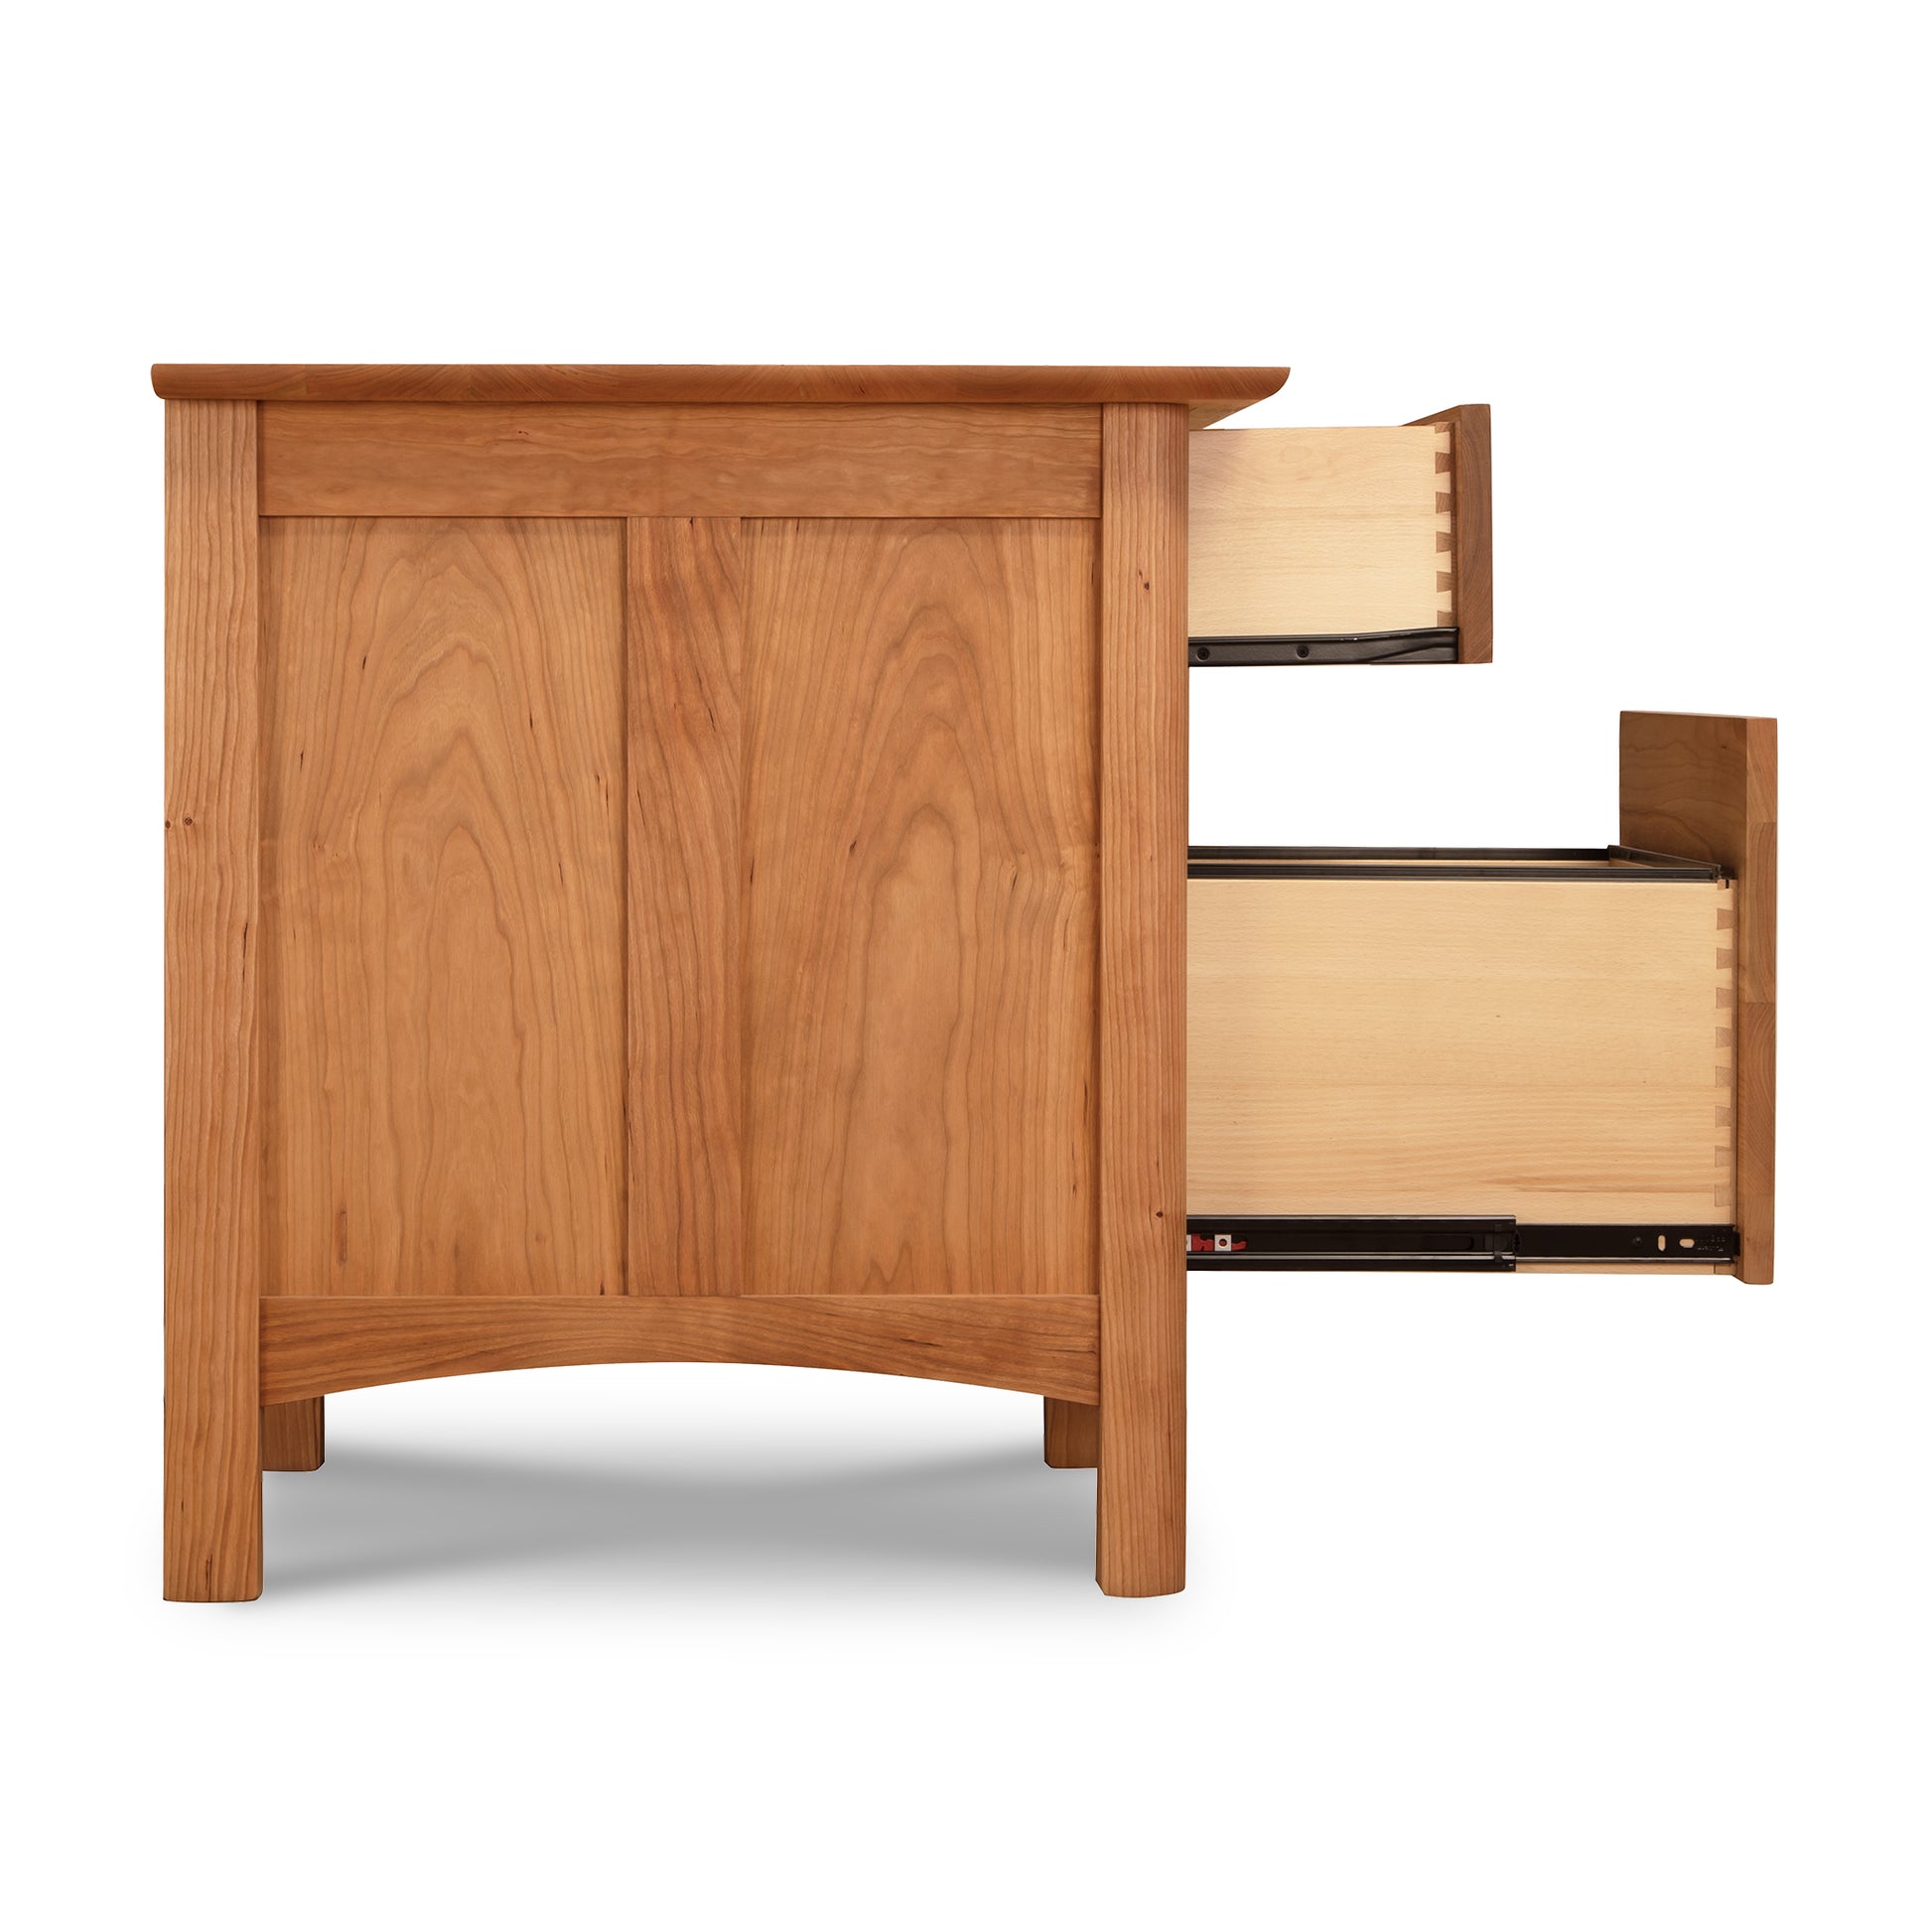 A wooden nightstand with two drawers and a Vermont Furniture Designs Heartwood Shaker Vertical File Cabinet.